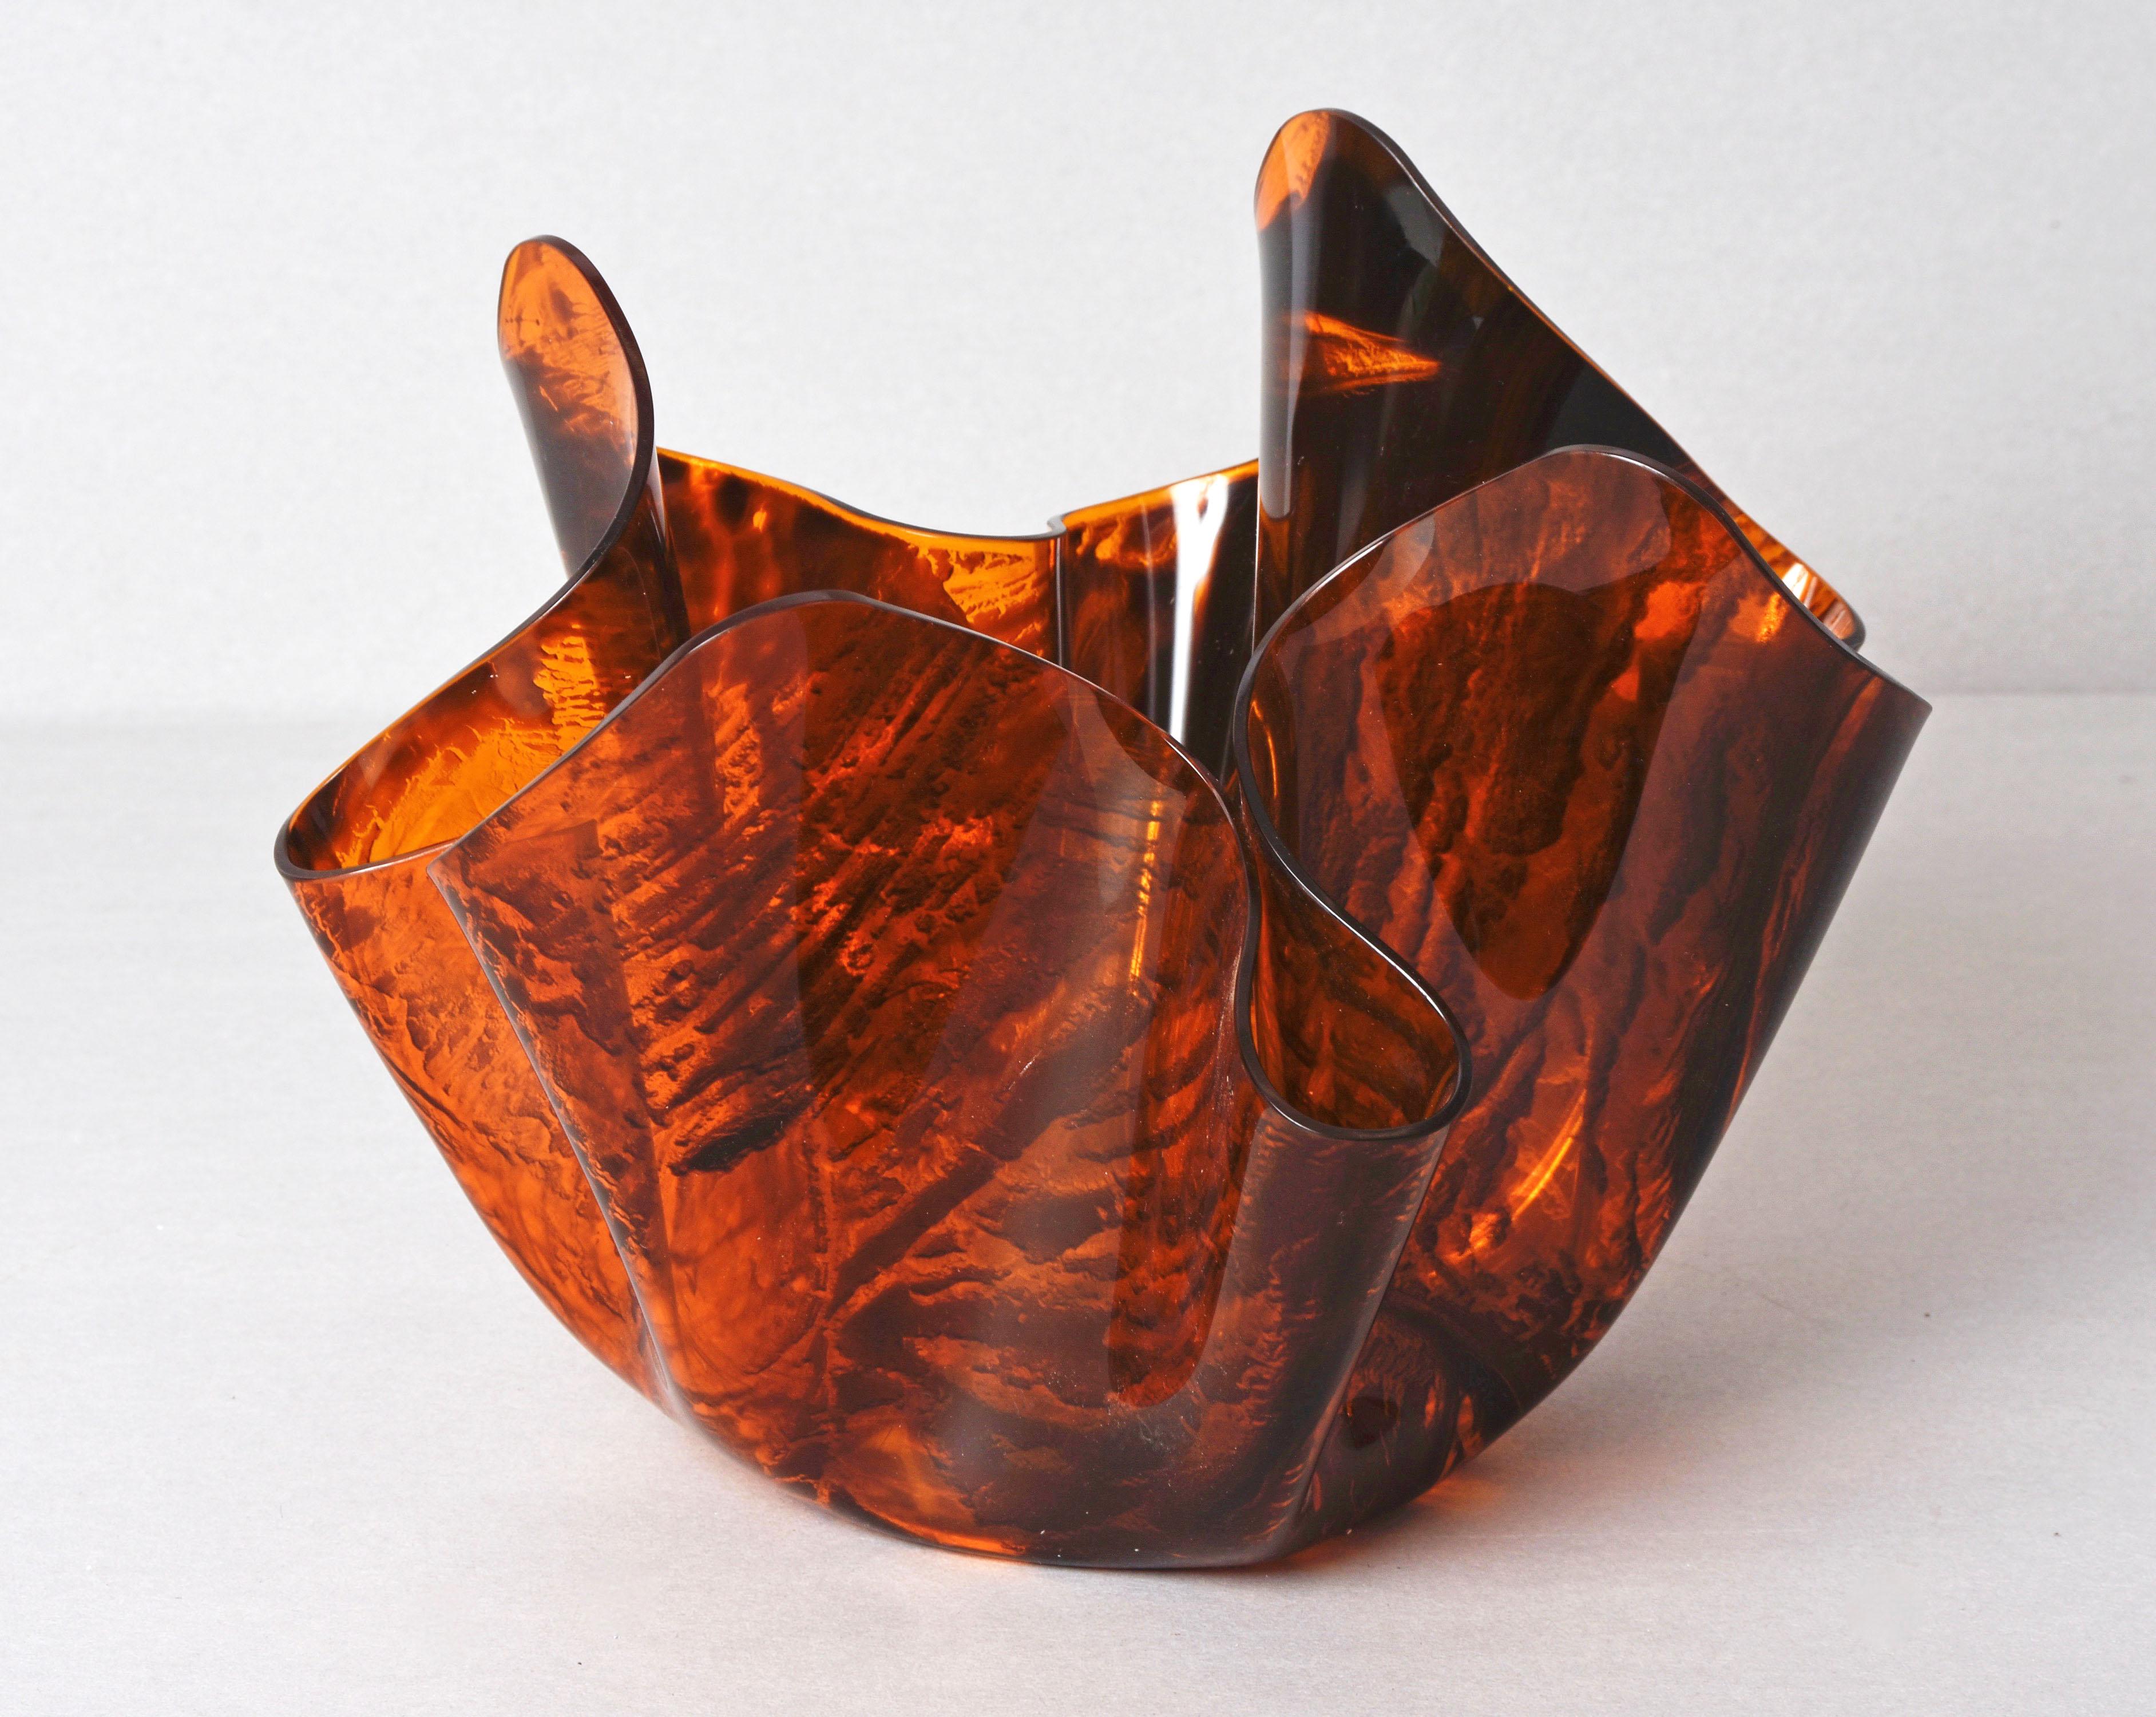 Magnificent centrepieces in tortoiseshell with Lucite effect. This amazing item was produced in Recanati, Italy, during the 1980s by Guzzini, the most representative Italian brand for homeware.

This midcentury centrepiece has an elegant napkin